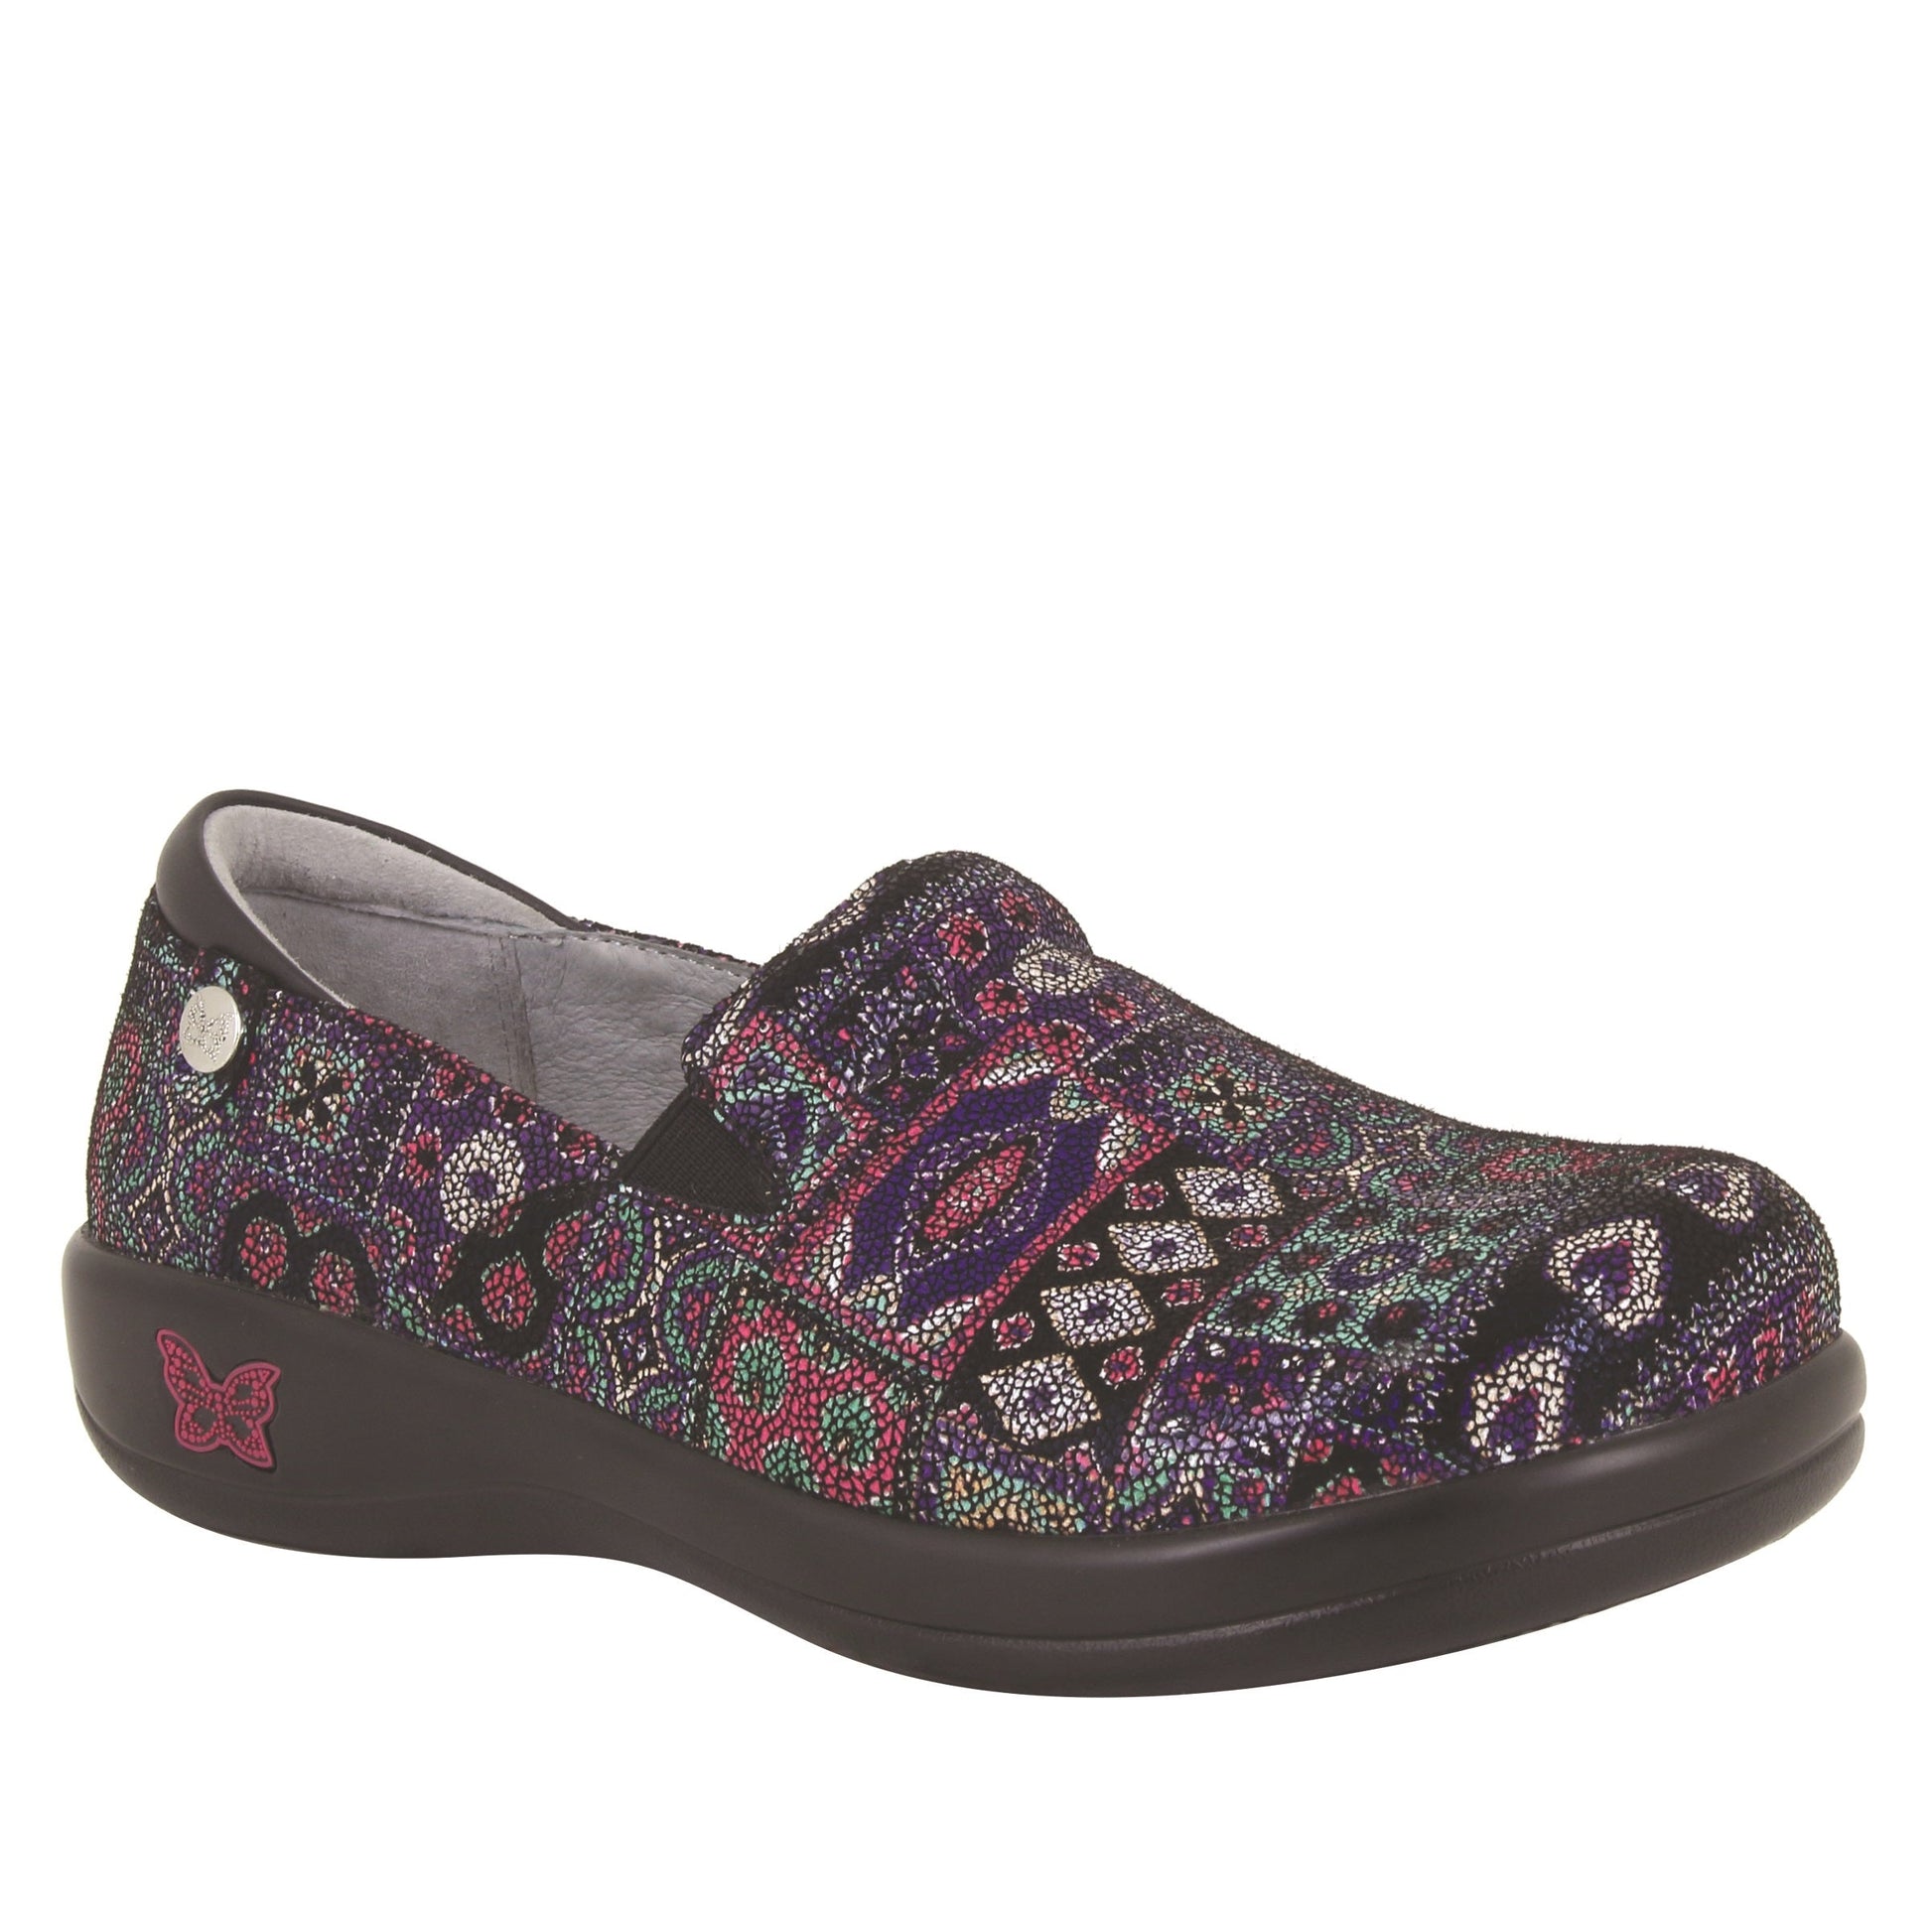 Alegria Sale Shoe Size 37 Keli Professional in Persian Rug at Parker's Clothing and Shoes.